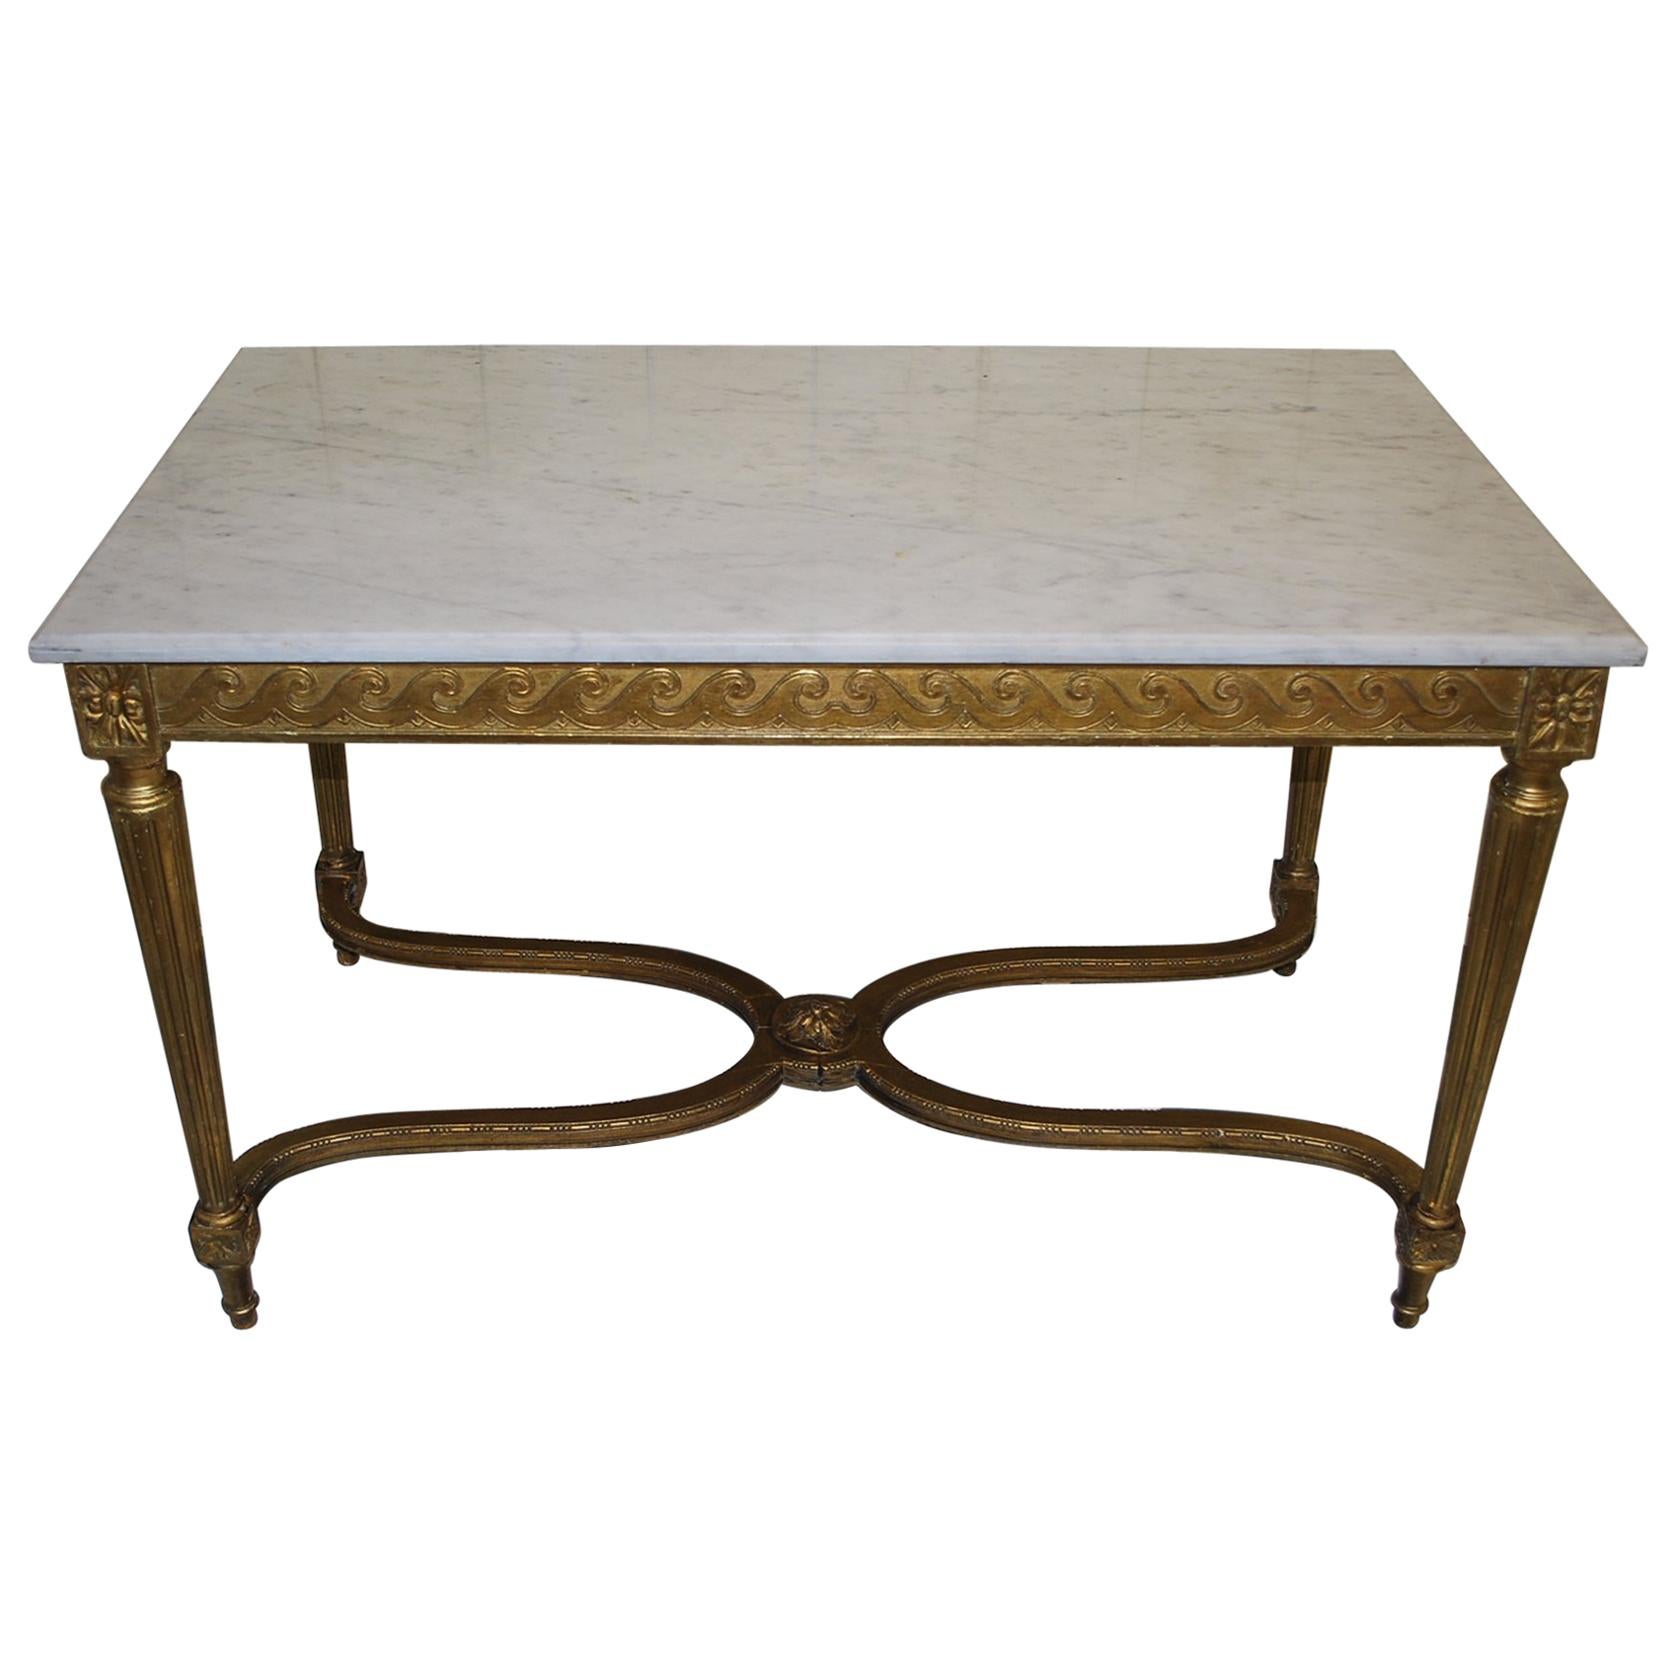 Antique French Giltwood Rectangular Centre Table or Sofa Side Table For Sale